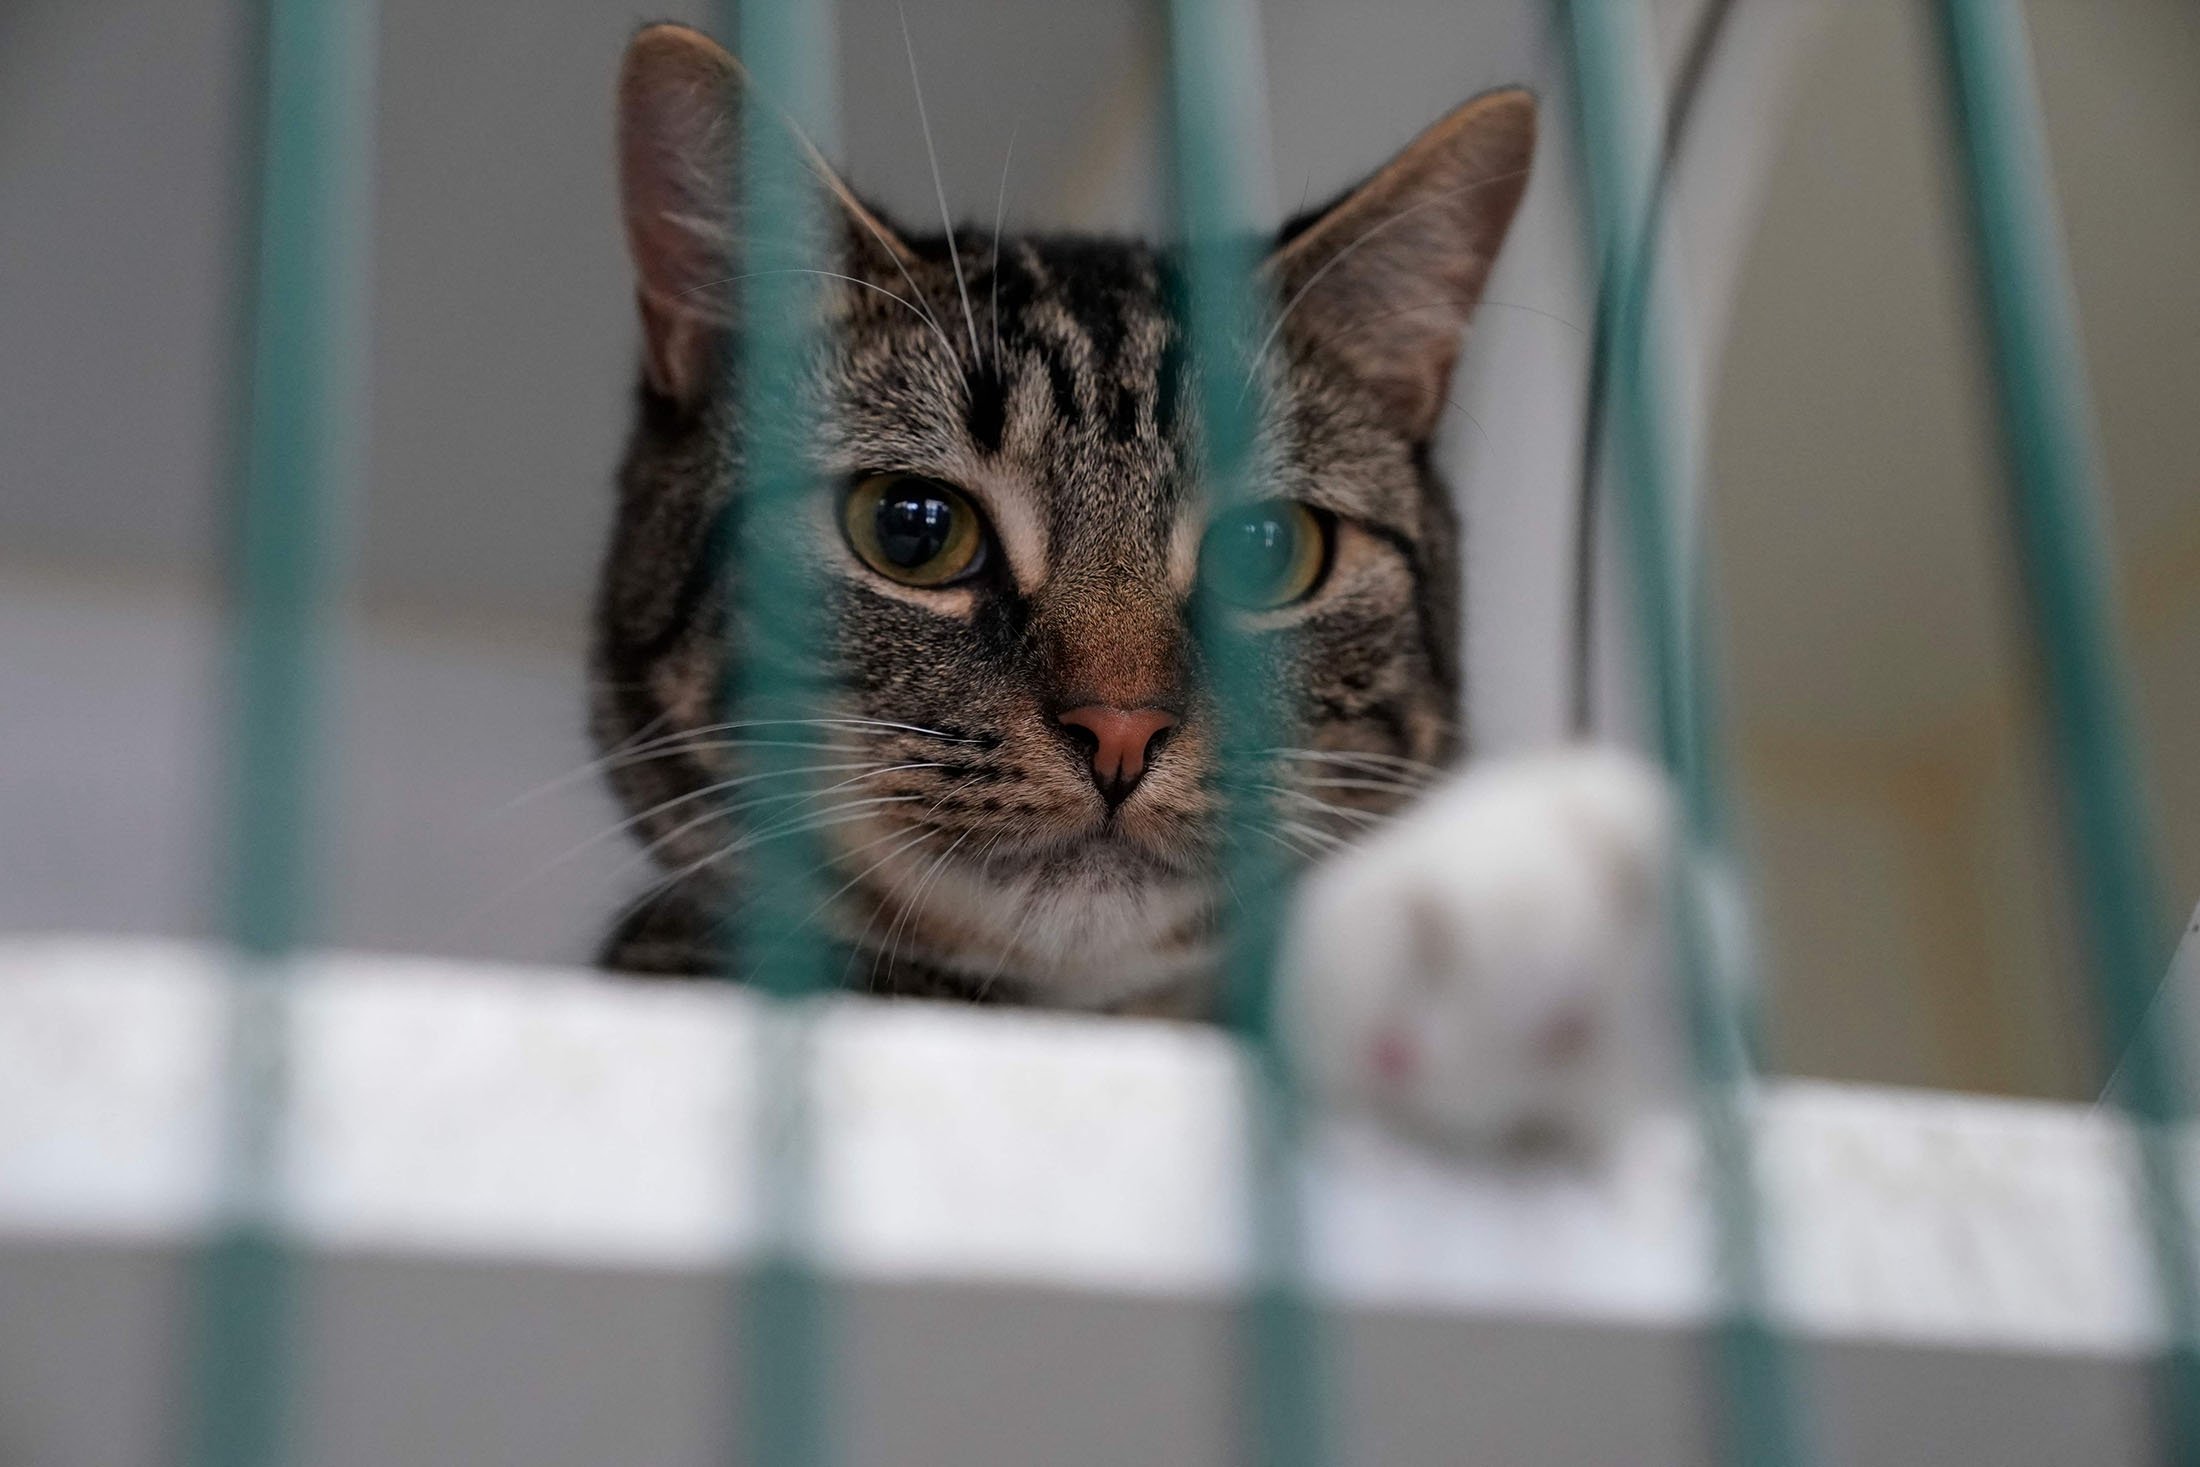 A cat is kenneled at the Animal Care Center of New York, U.S., June 25, 2021. (AFP Photo)